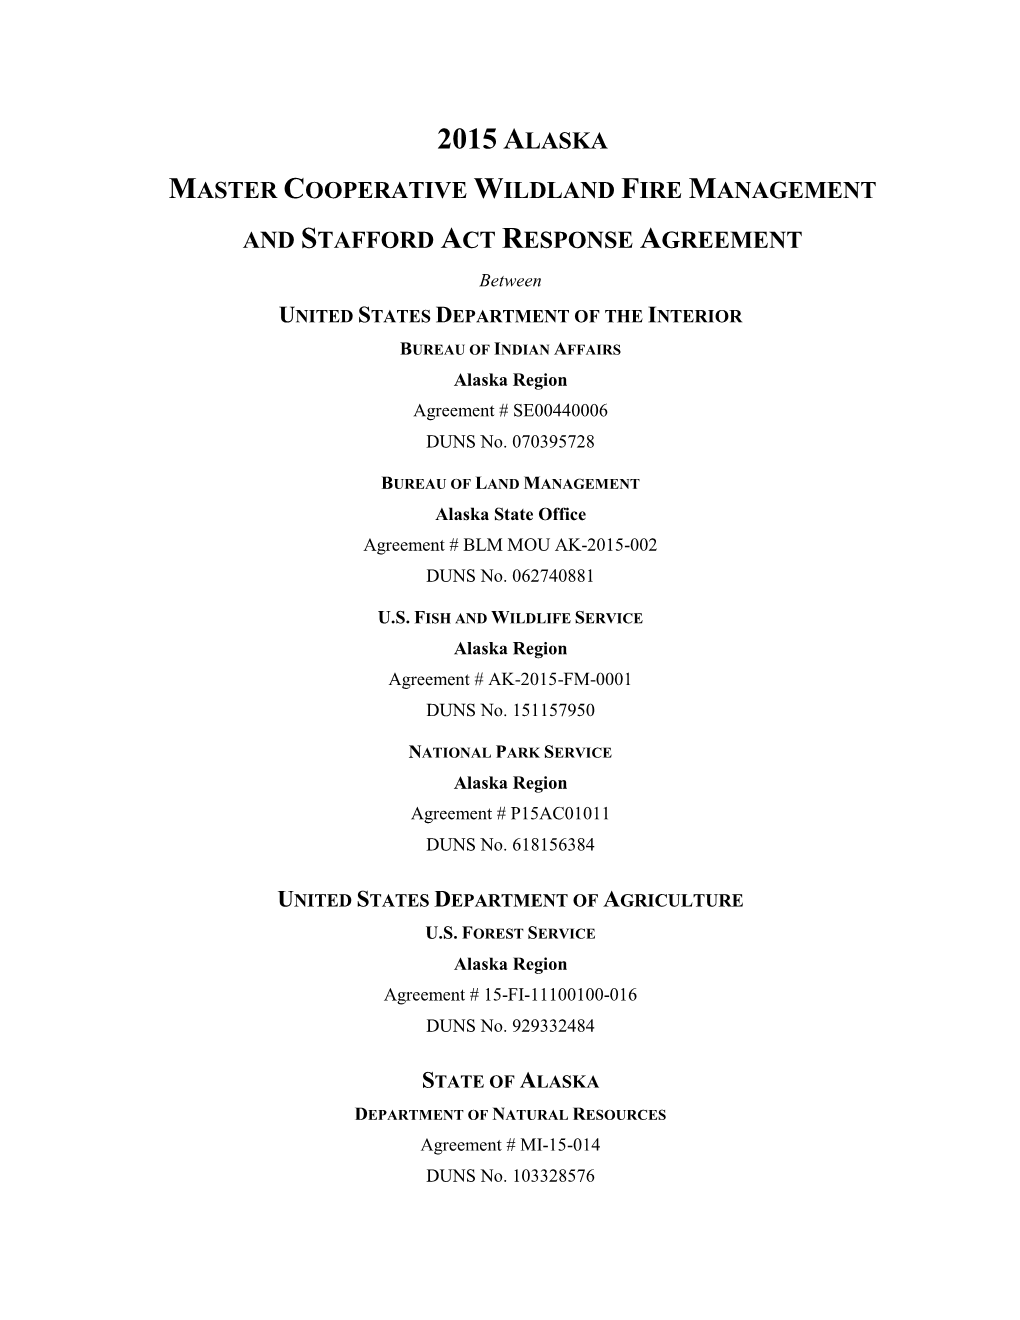 2015 Alaska Statewide Master Agreement with Exhibits